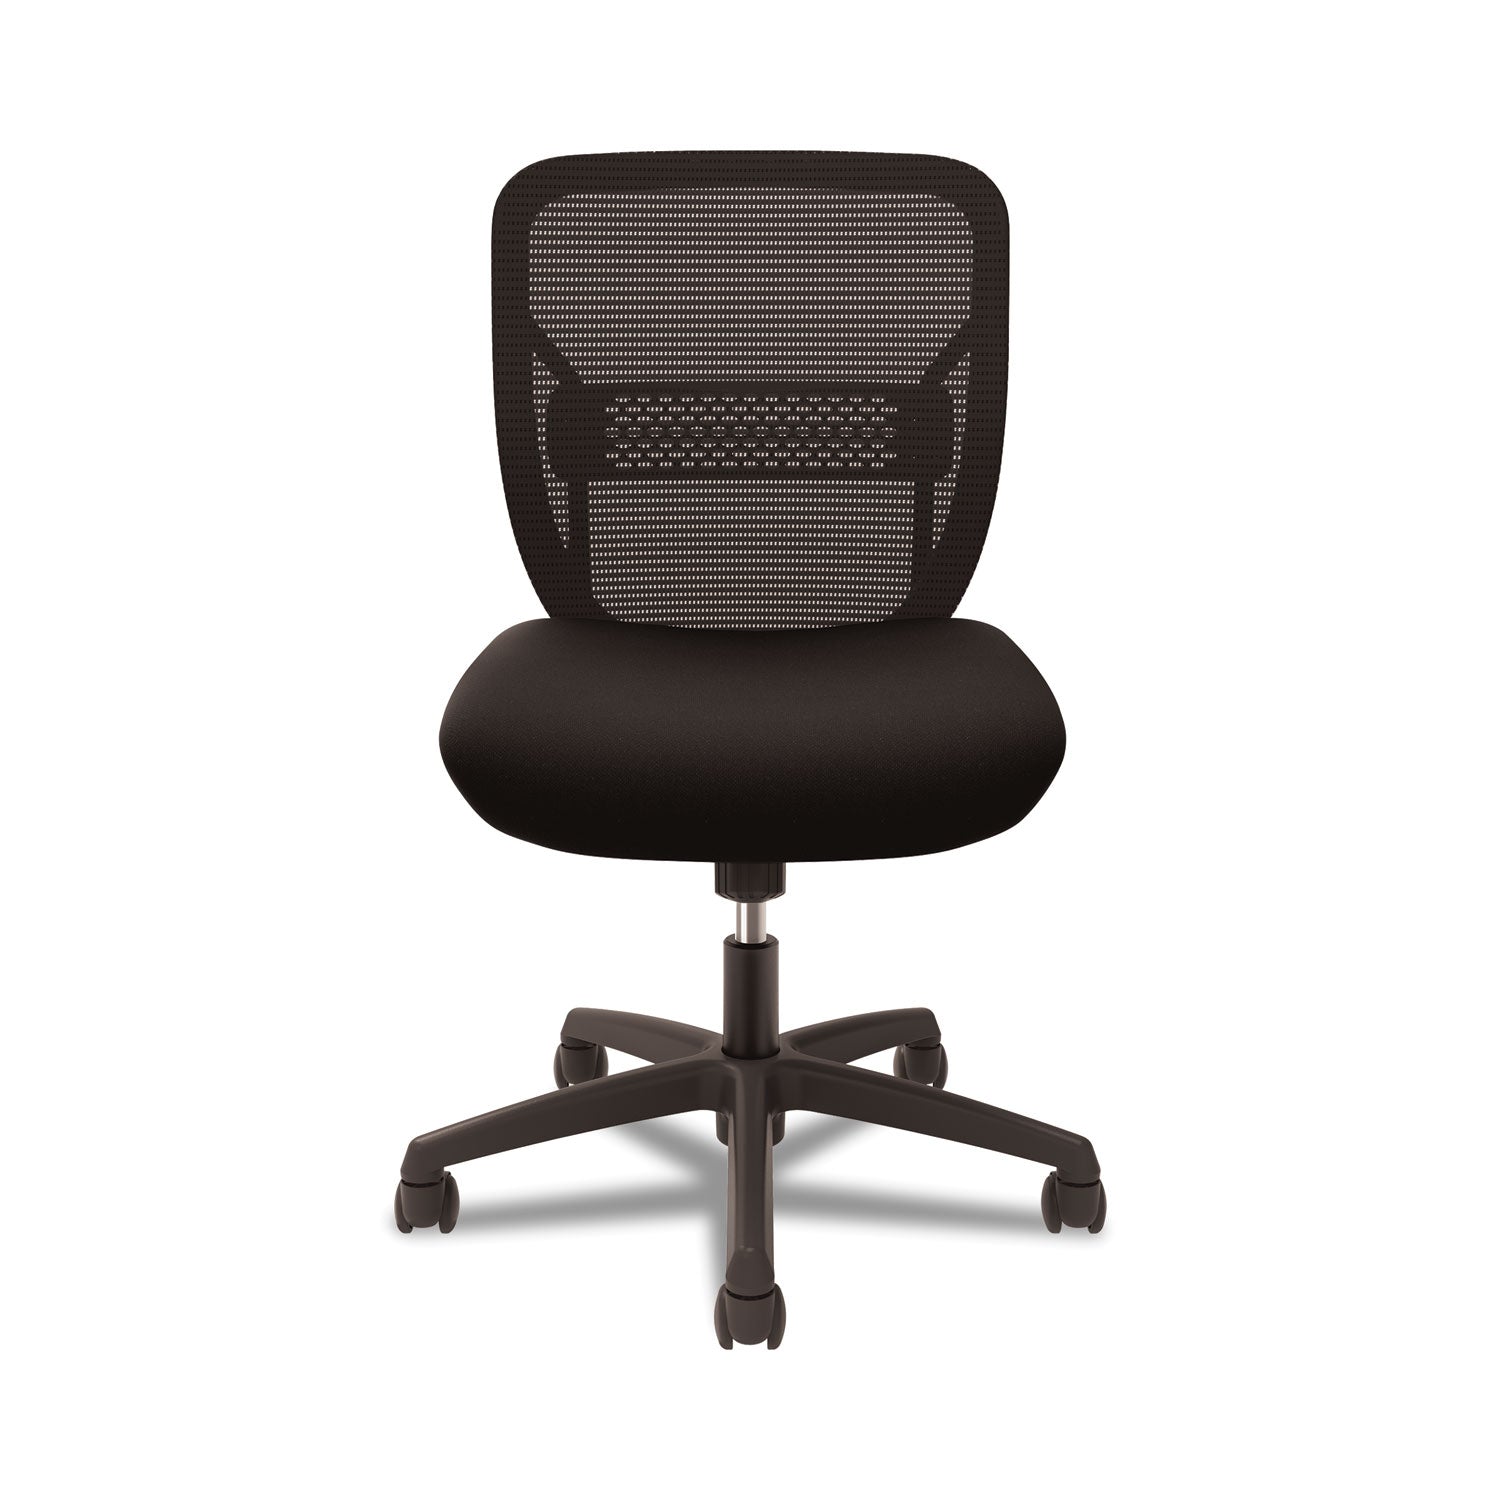 gateway-mid-back-task-chair-supports-up-to-250-lb-17-to-22-seat-height-black_hongvnmz1accf10 - 5